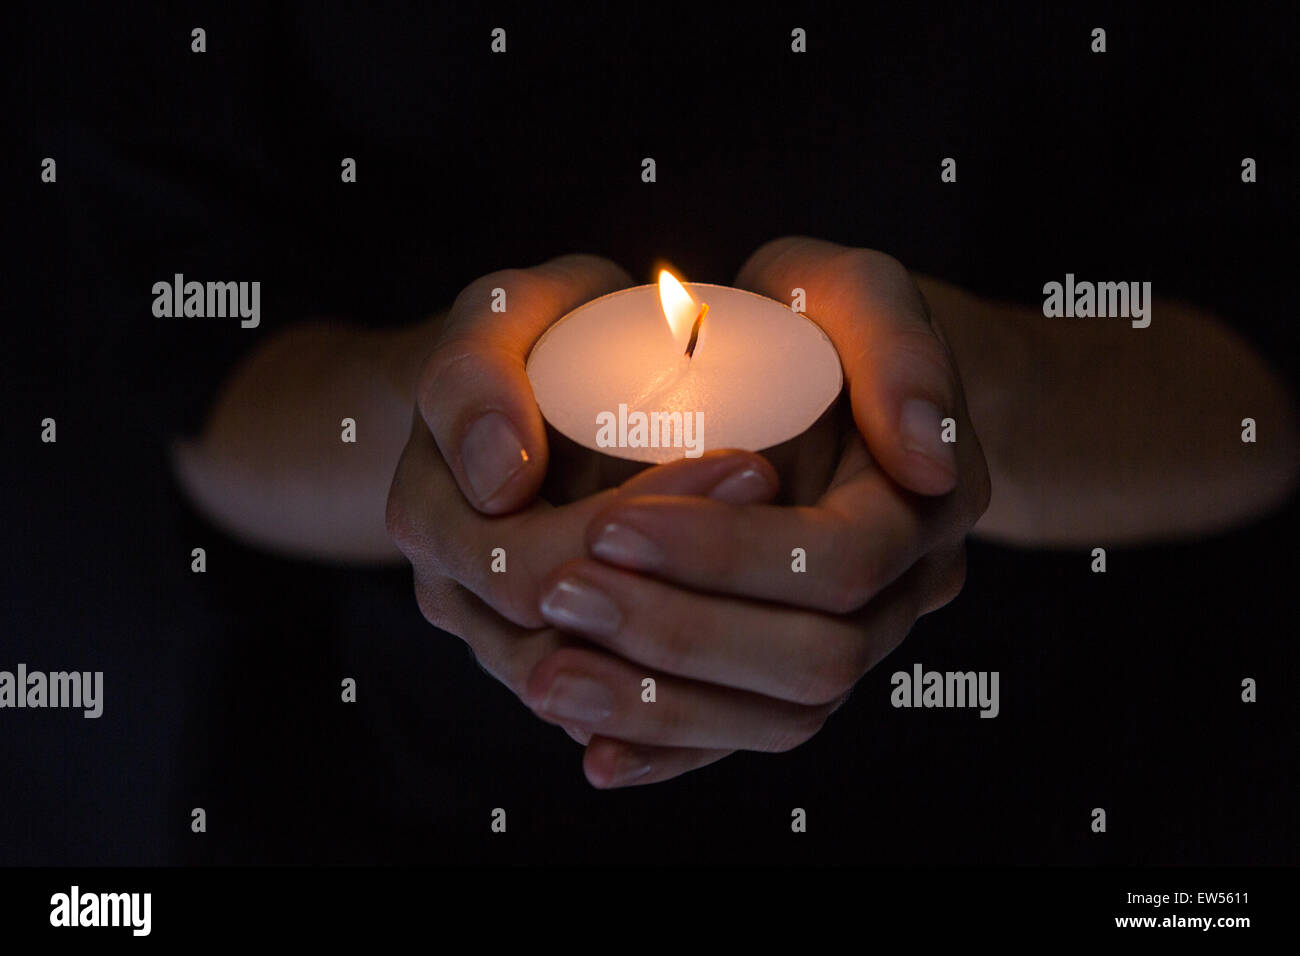 Hands holding candle Stock Photo